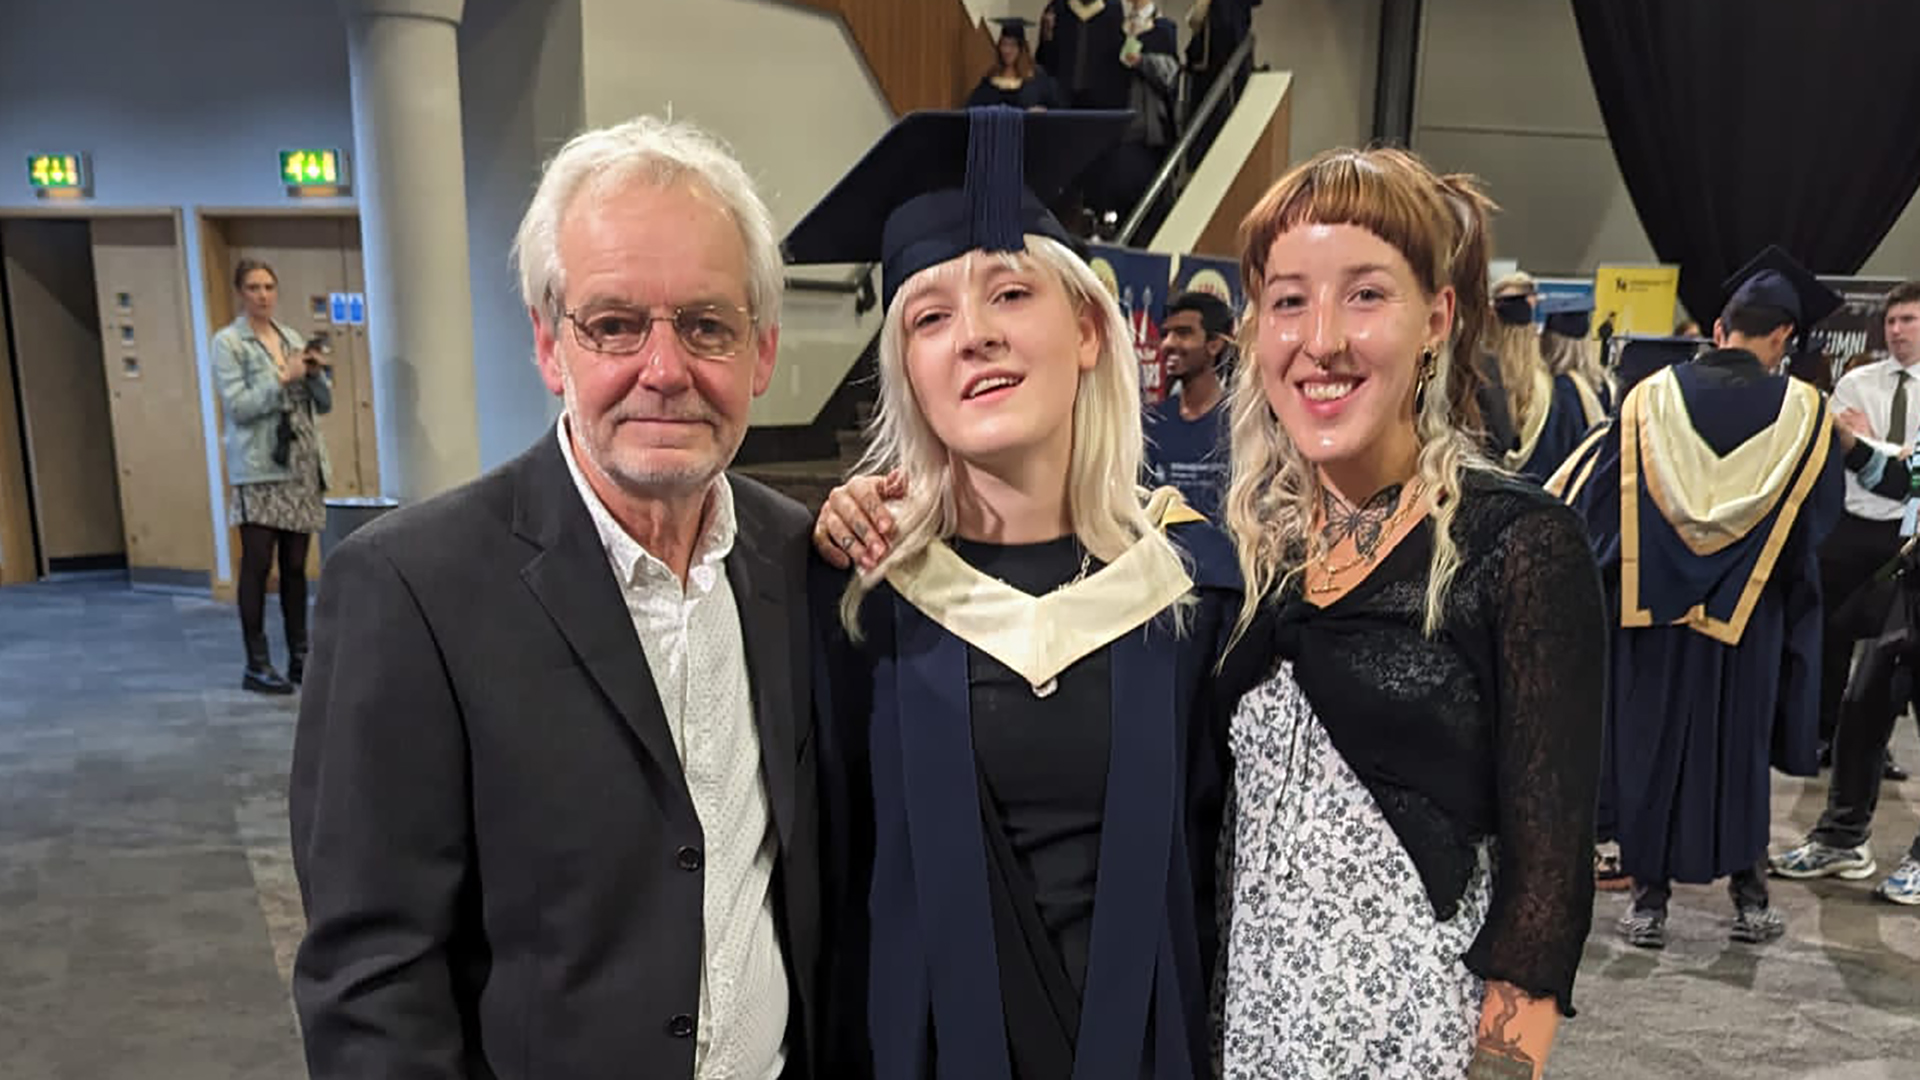 A man with his two daughters, the middle one is wearing graduate robes